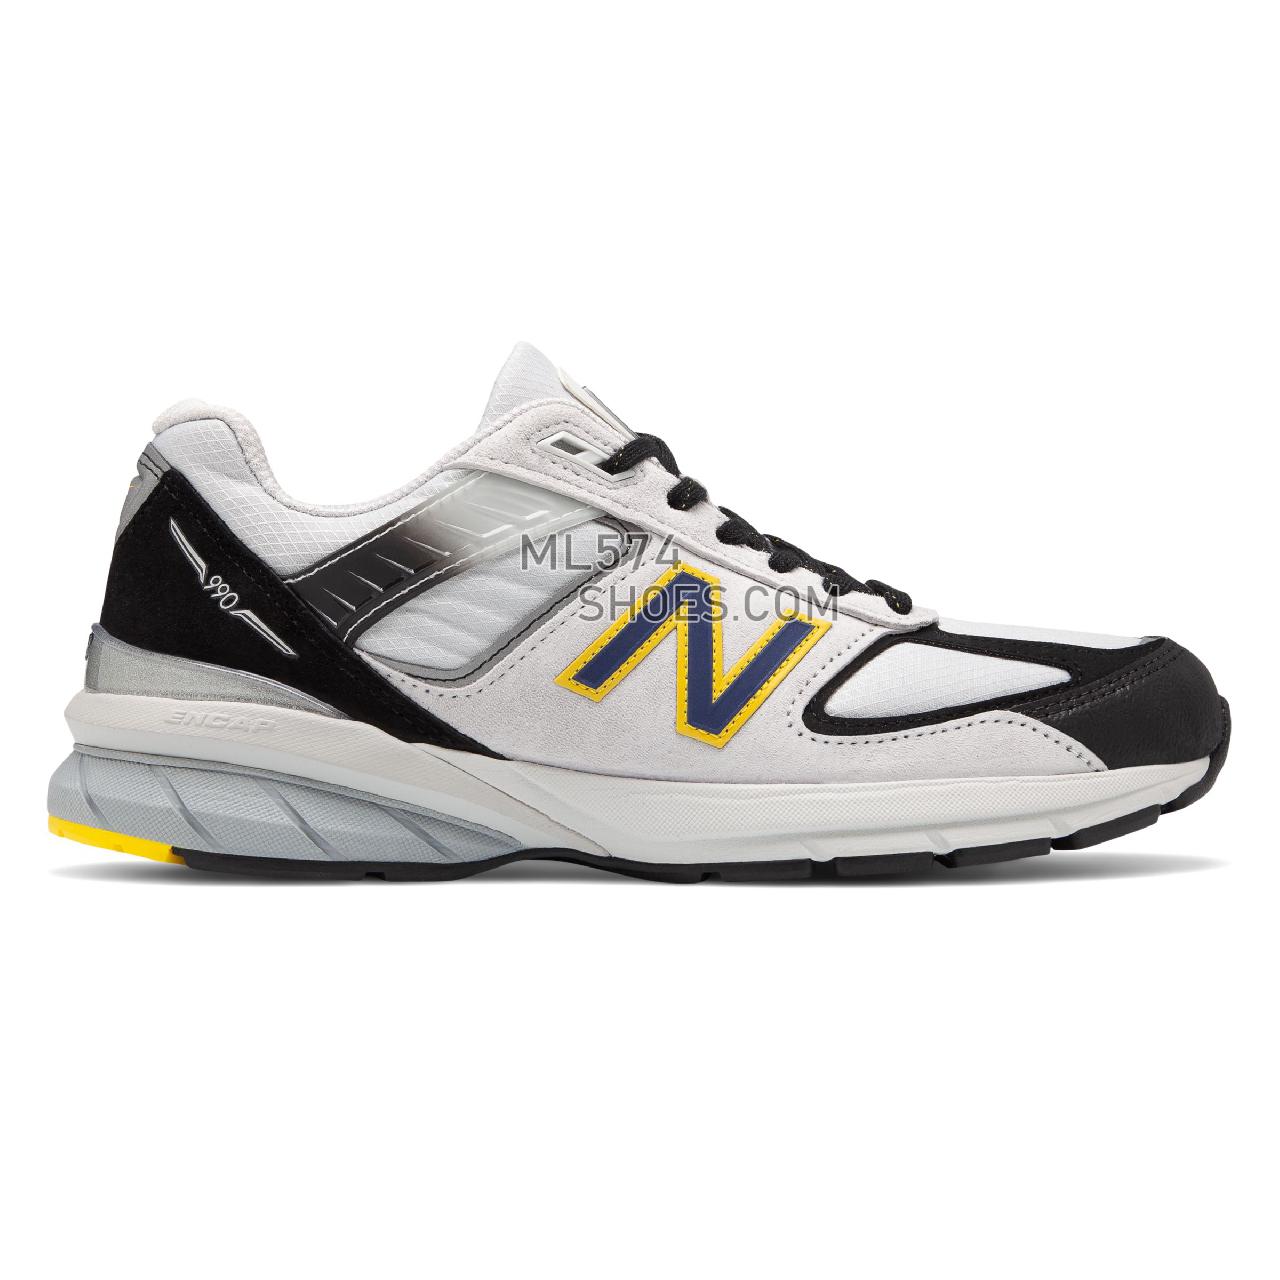 New Balance Made in US 990v5 - Men's Neutral Running - Silver with Black - M990SB5